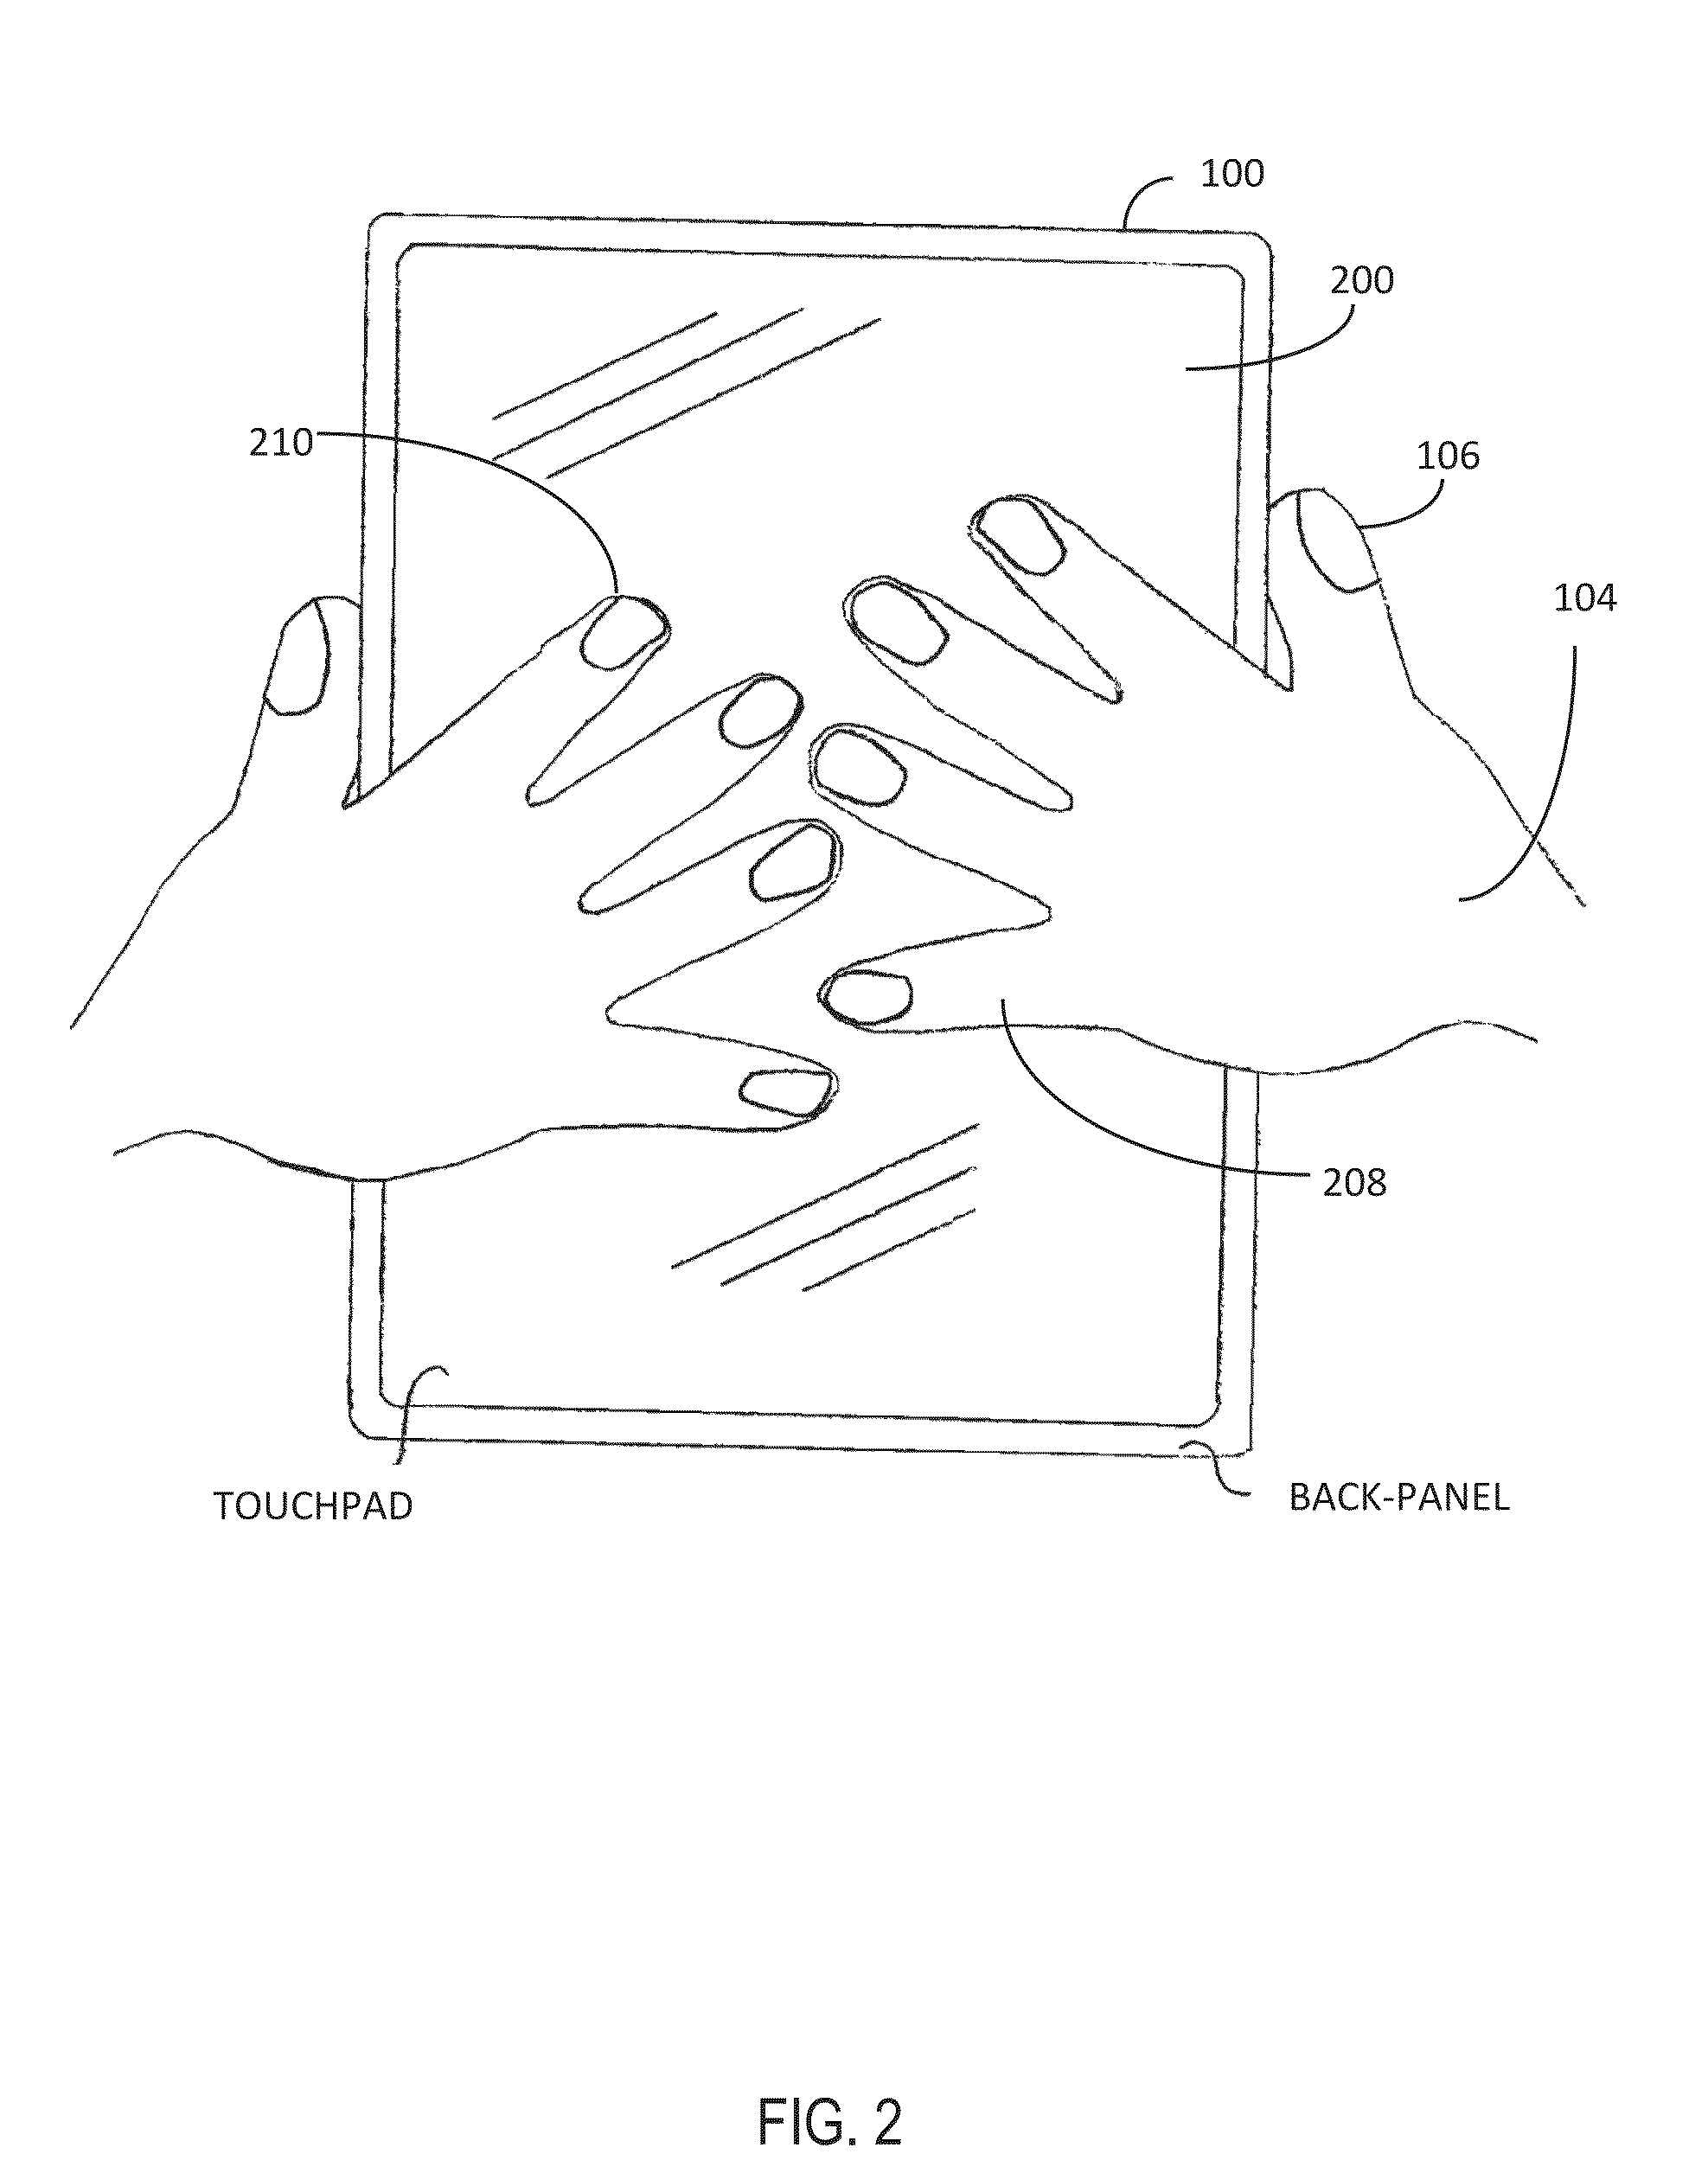 Method for controlling a virtual keyboard from a touchpad of a computerized device